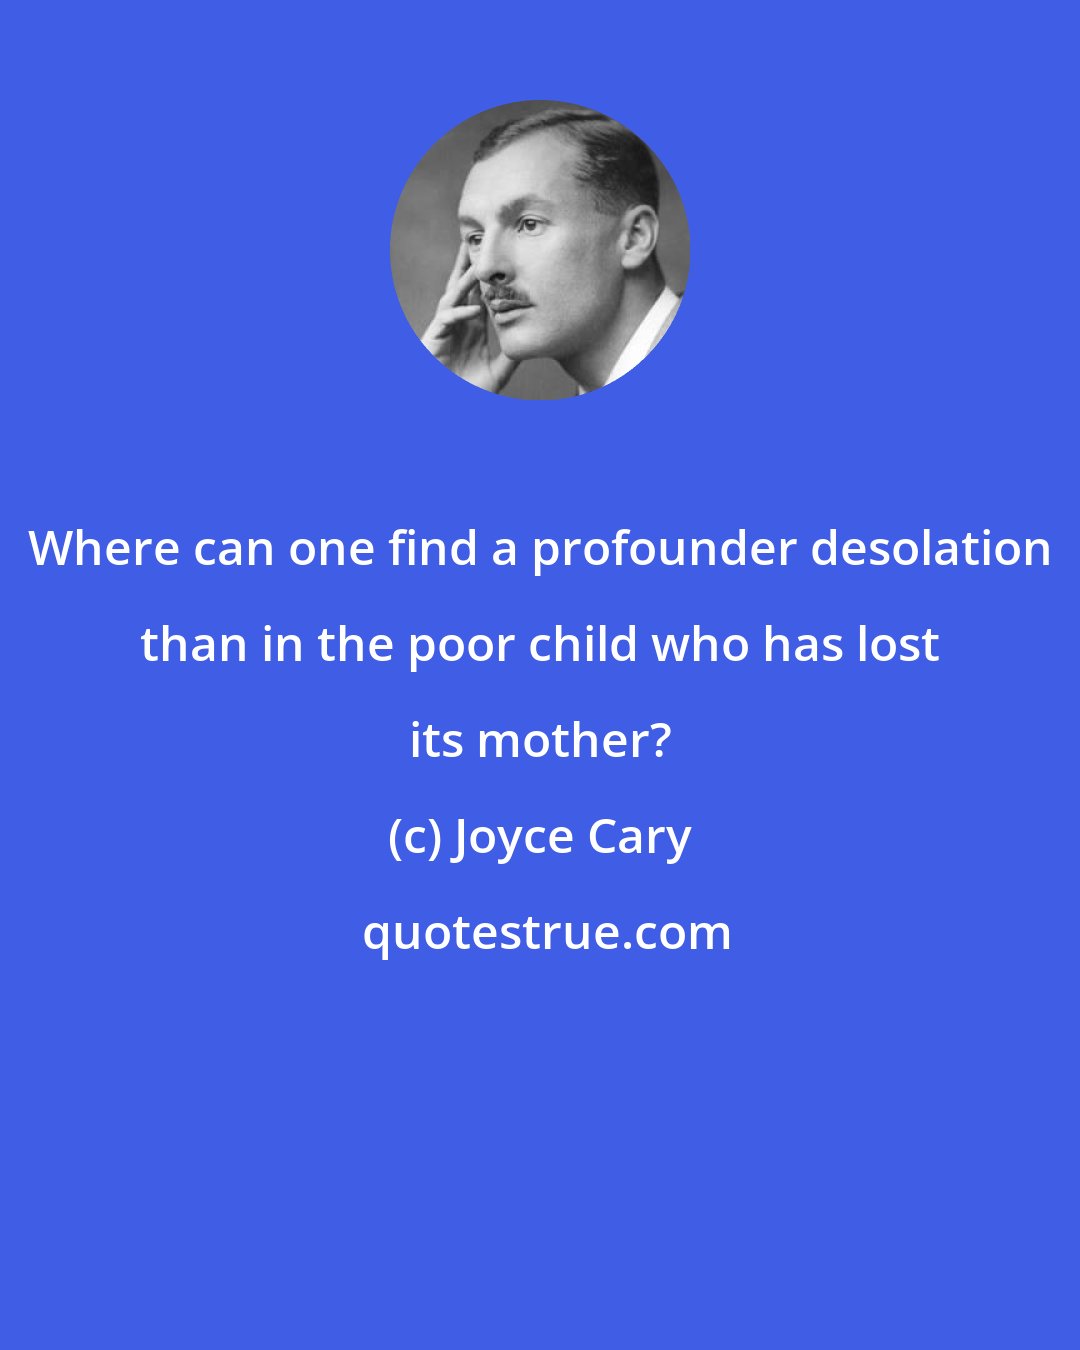 Joyce Cary: Where can one find a profounder desolation than in the poor child who has lost its mother?